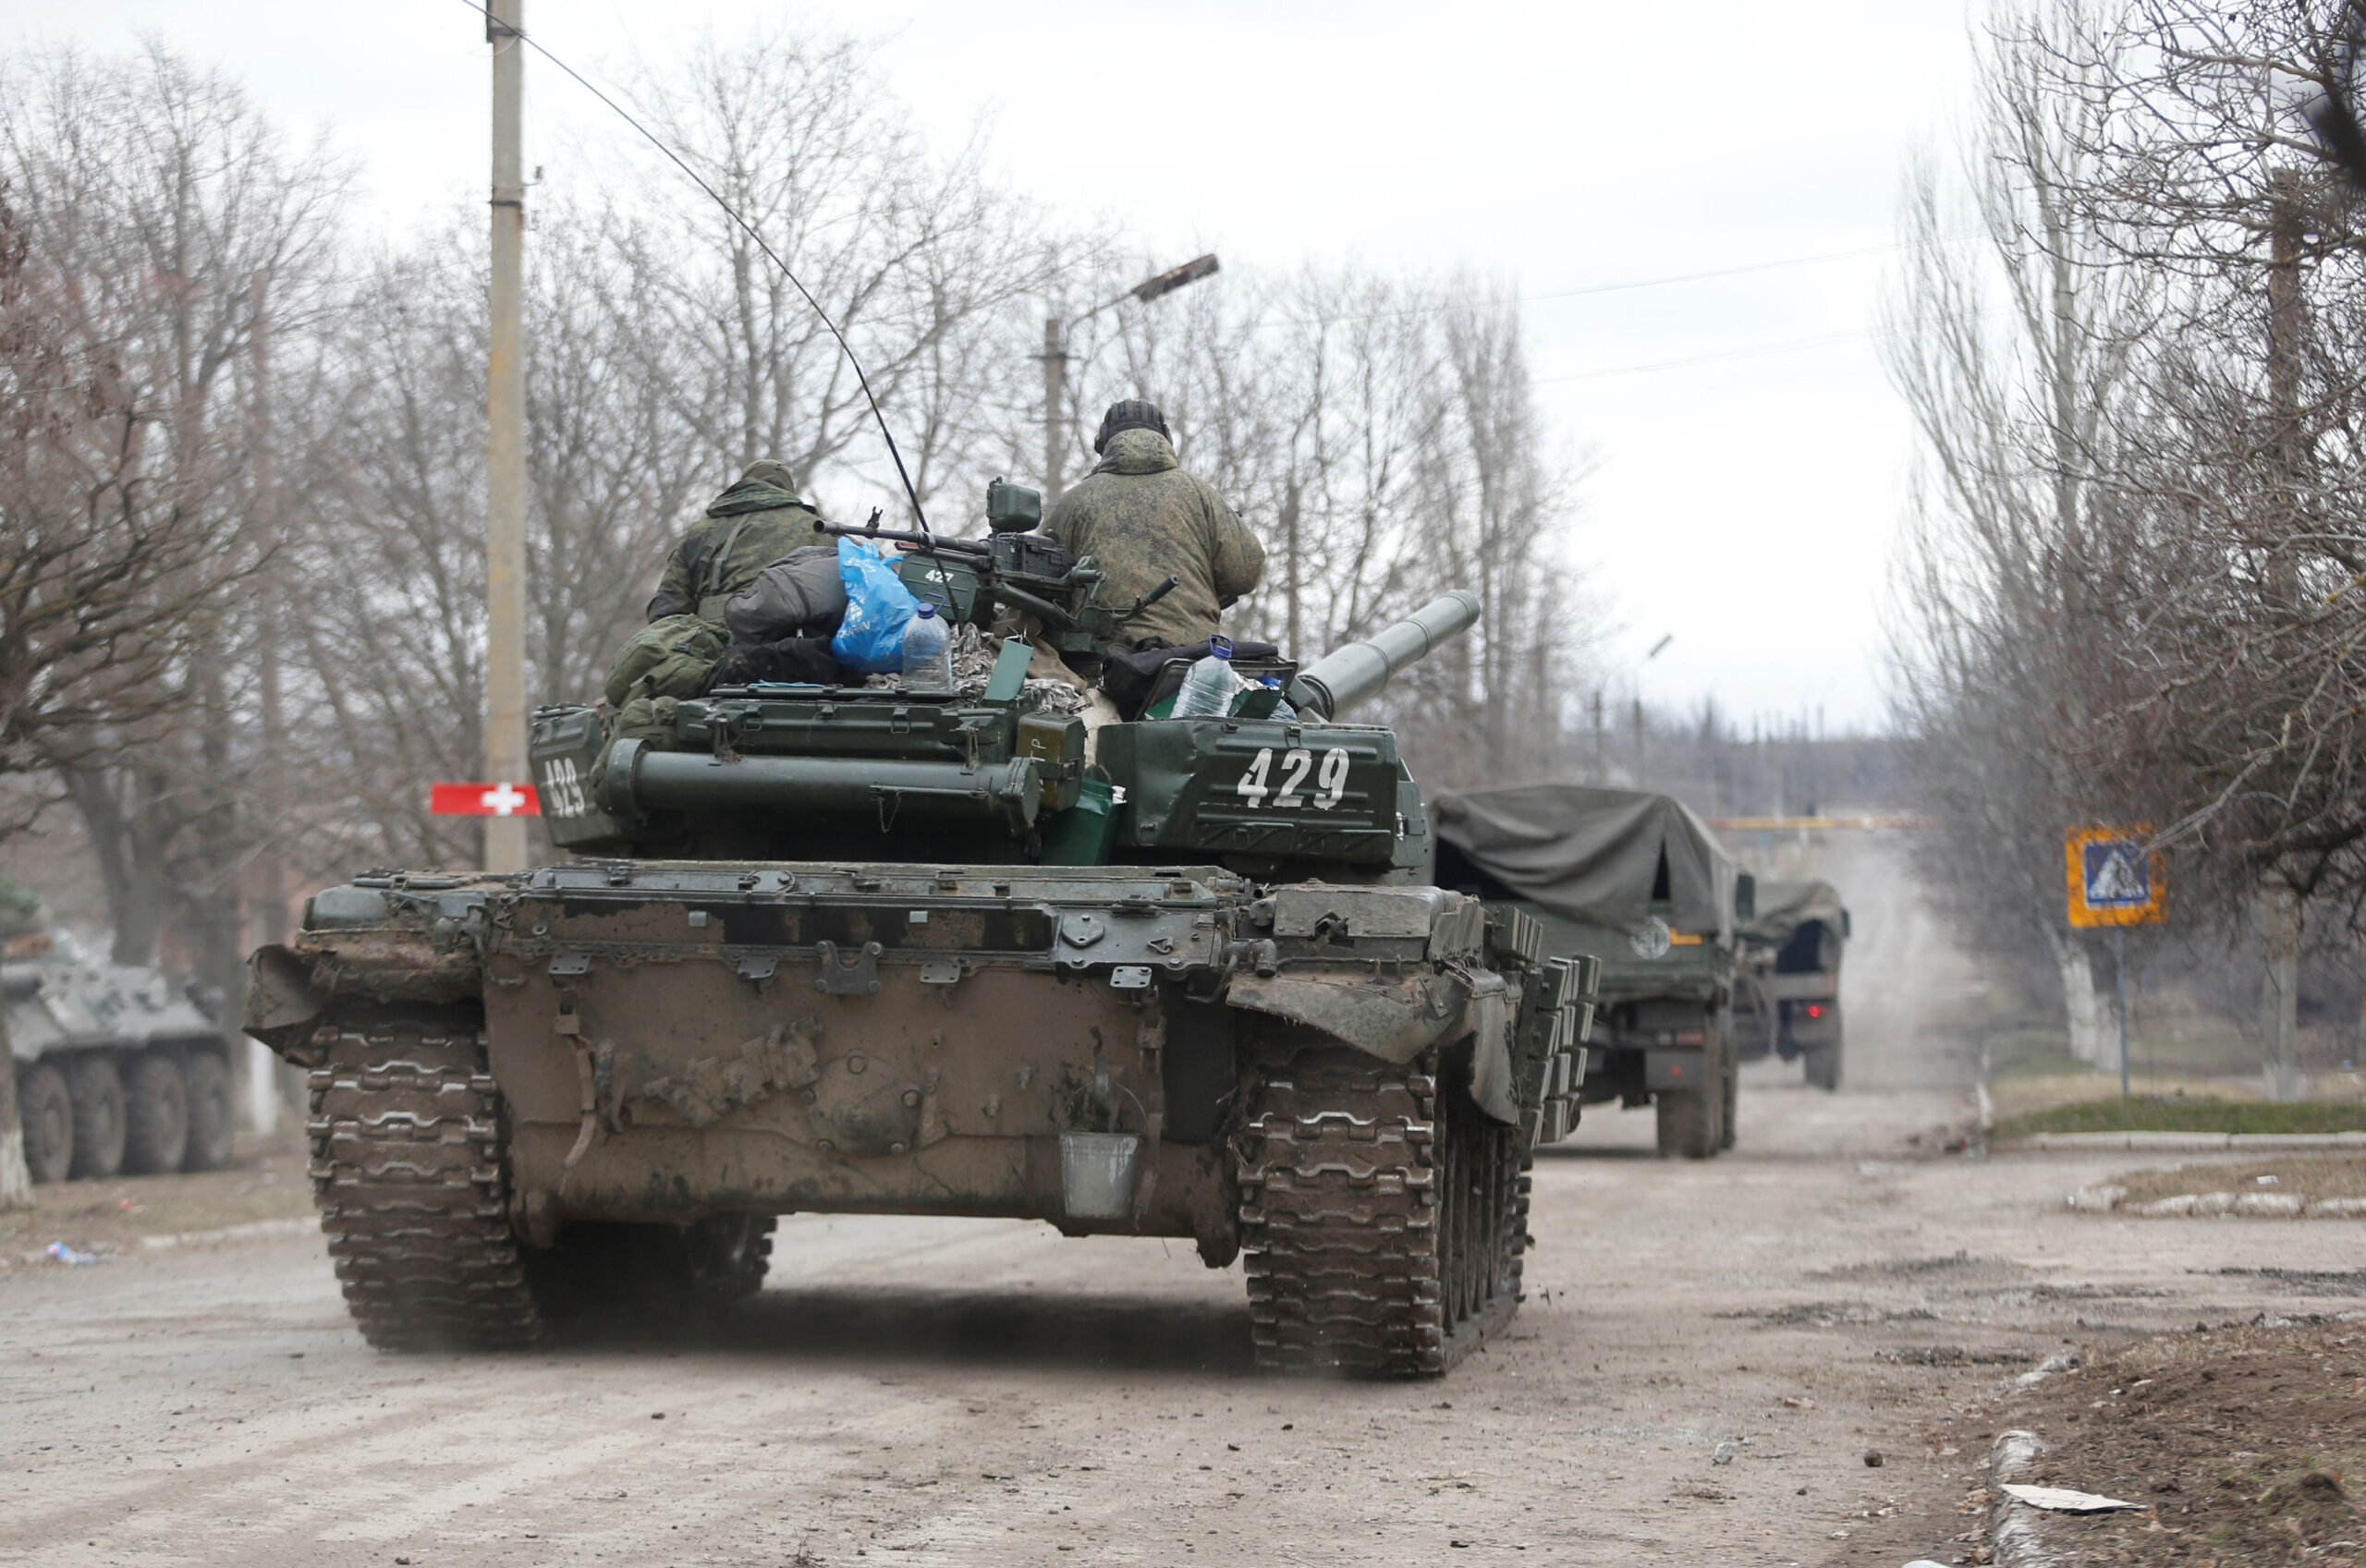 Russian convoy advance toward Kiev stalled by resistance, US says